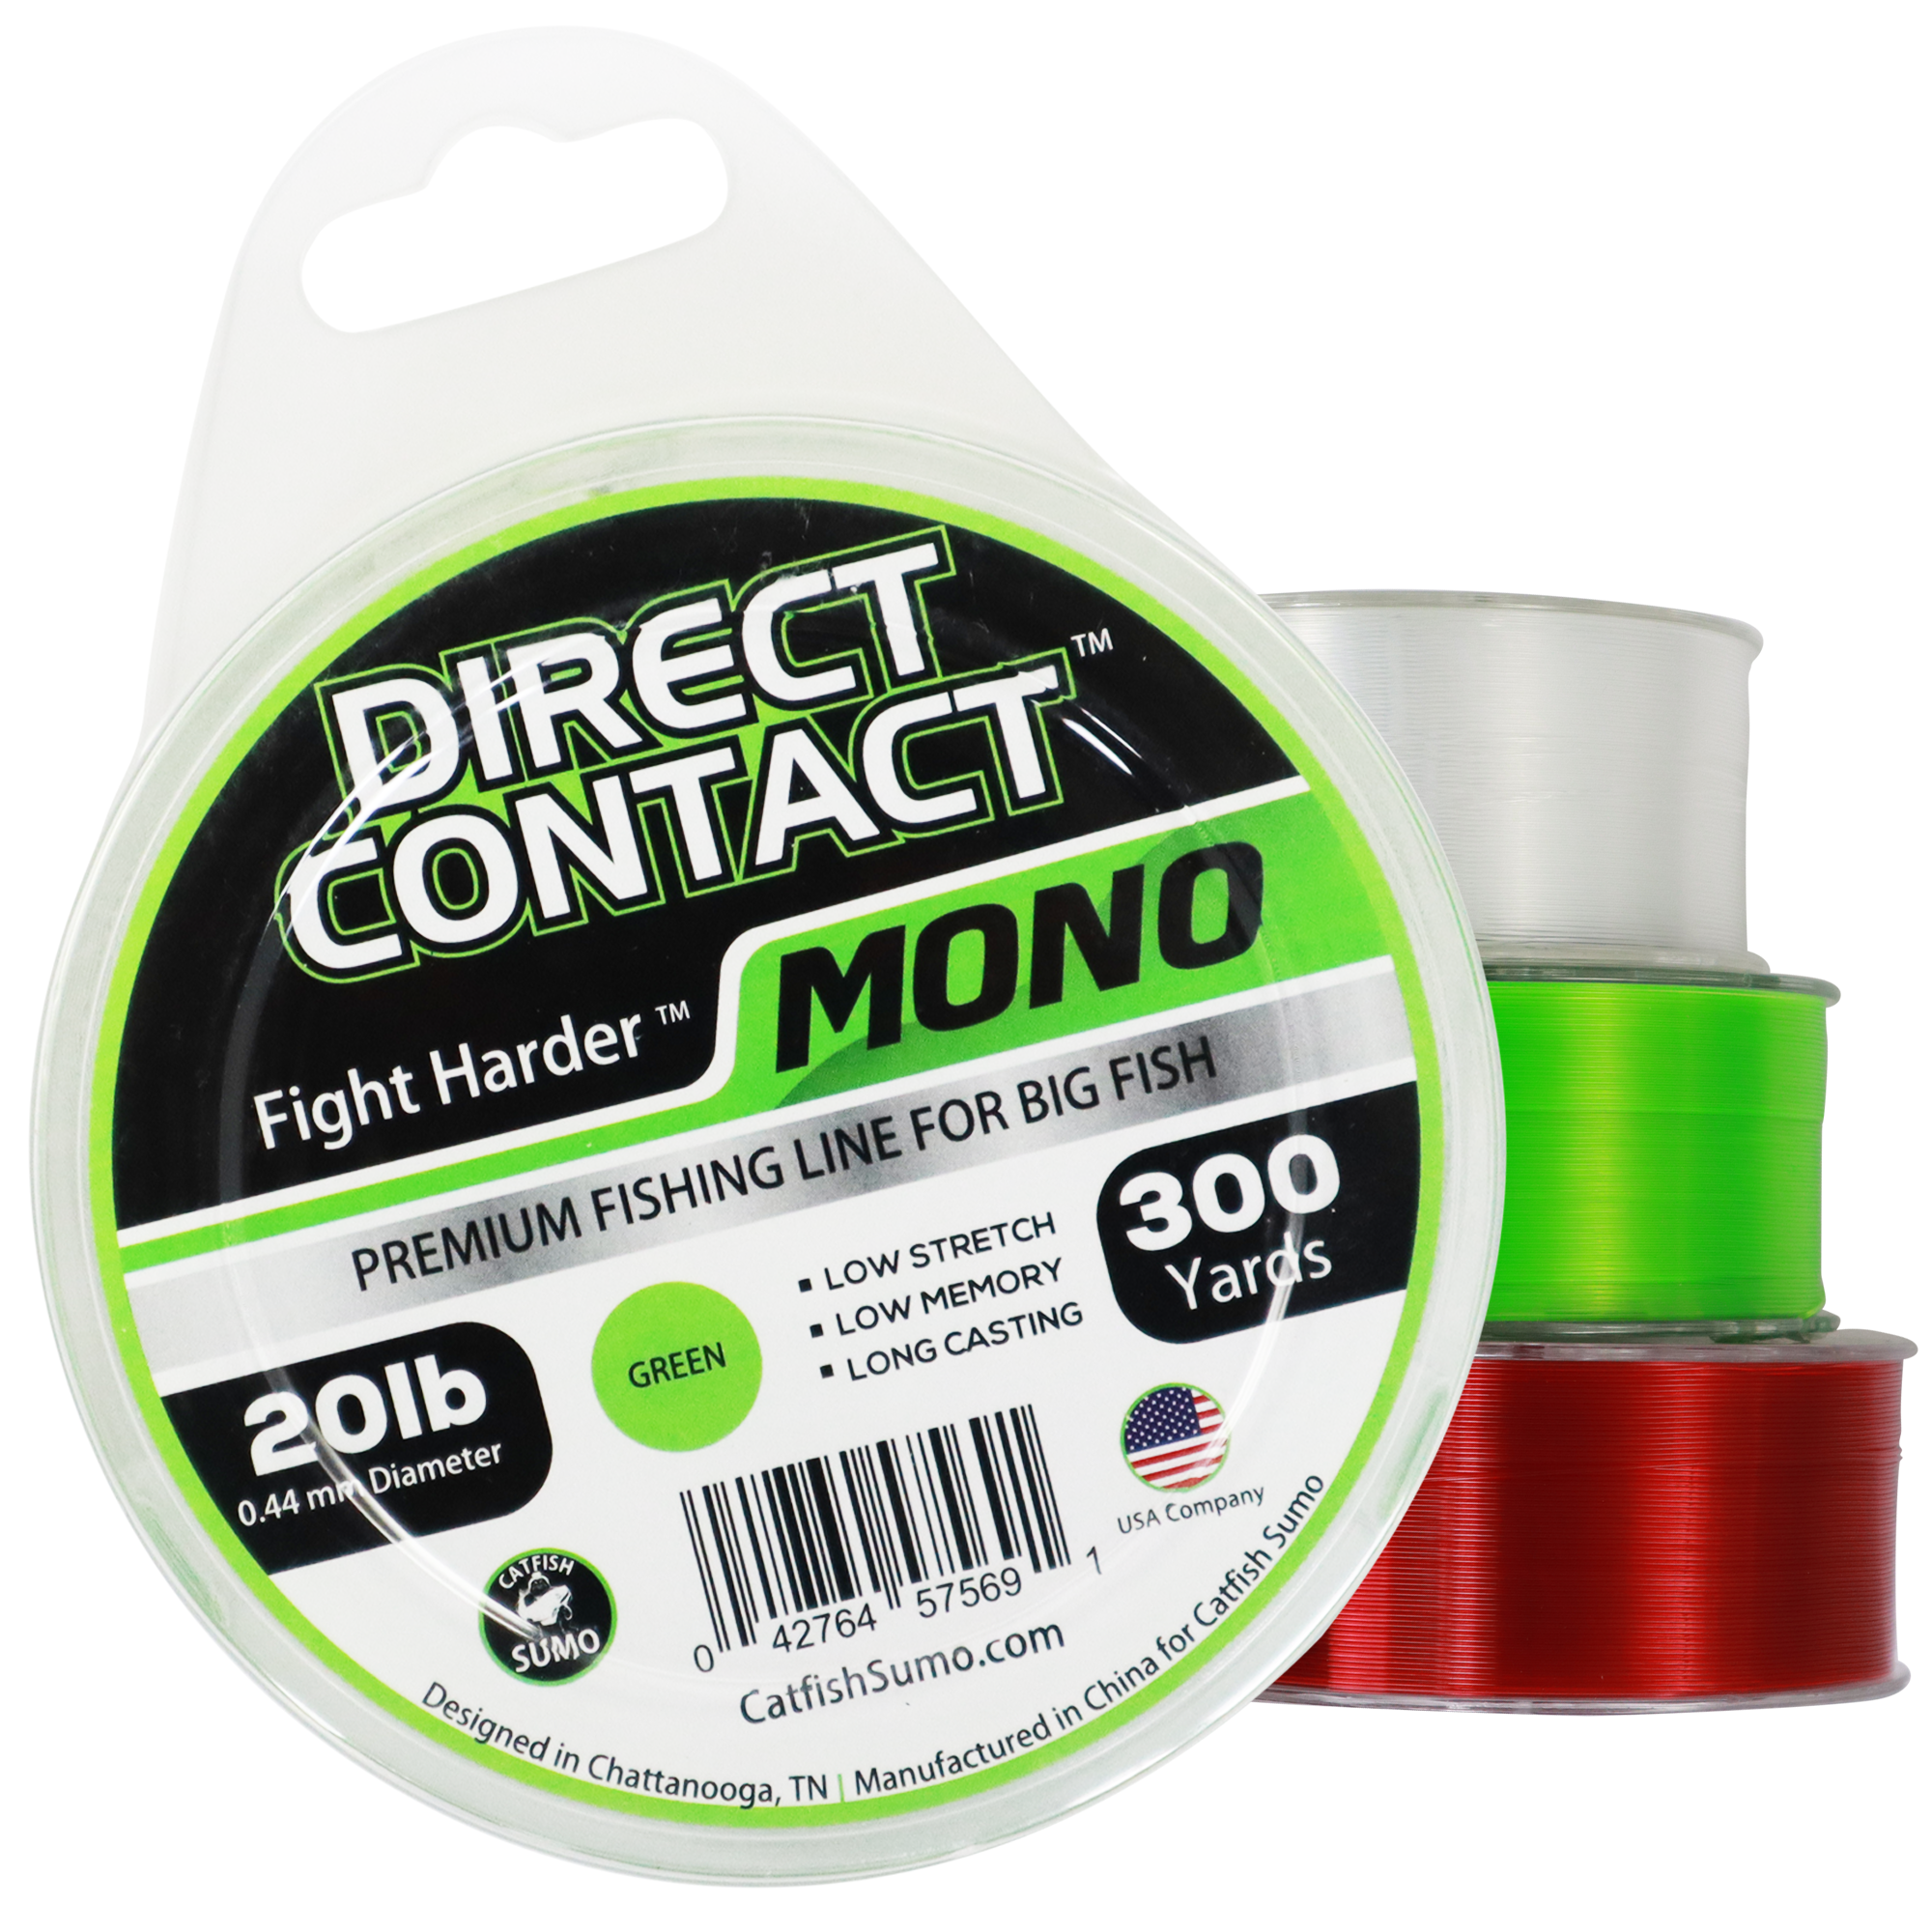 Buy mono fishing line Online in OMAN at Low Prices at desertcart